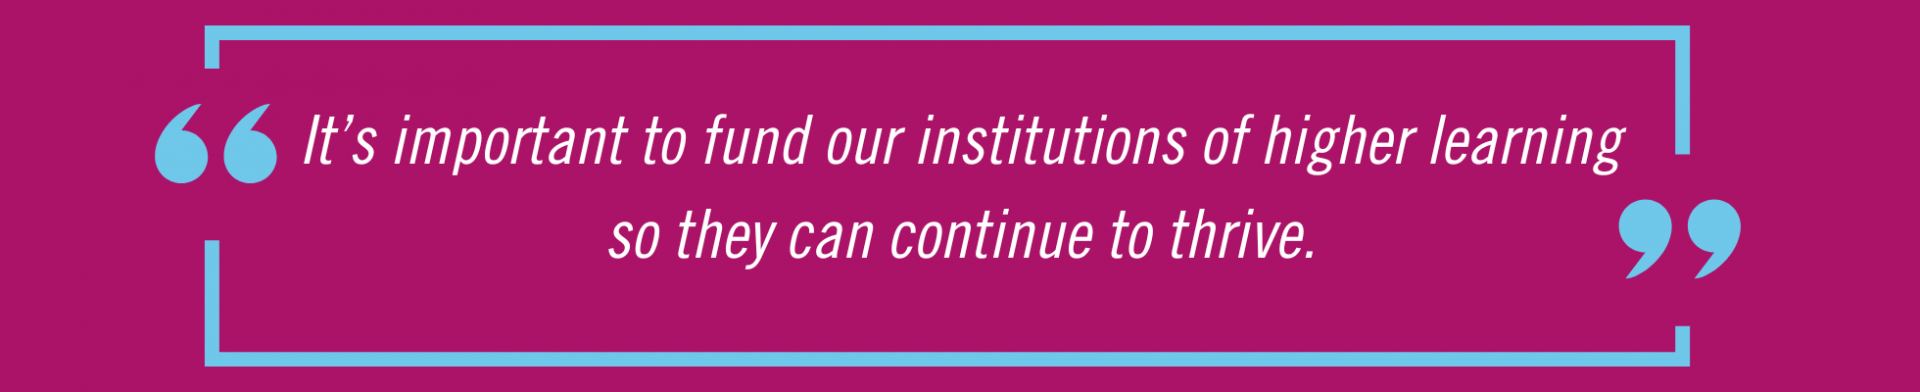 Hugh Hibbert quote: It’s important to fund our institutions of higher learning so they can continue to thrive.